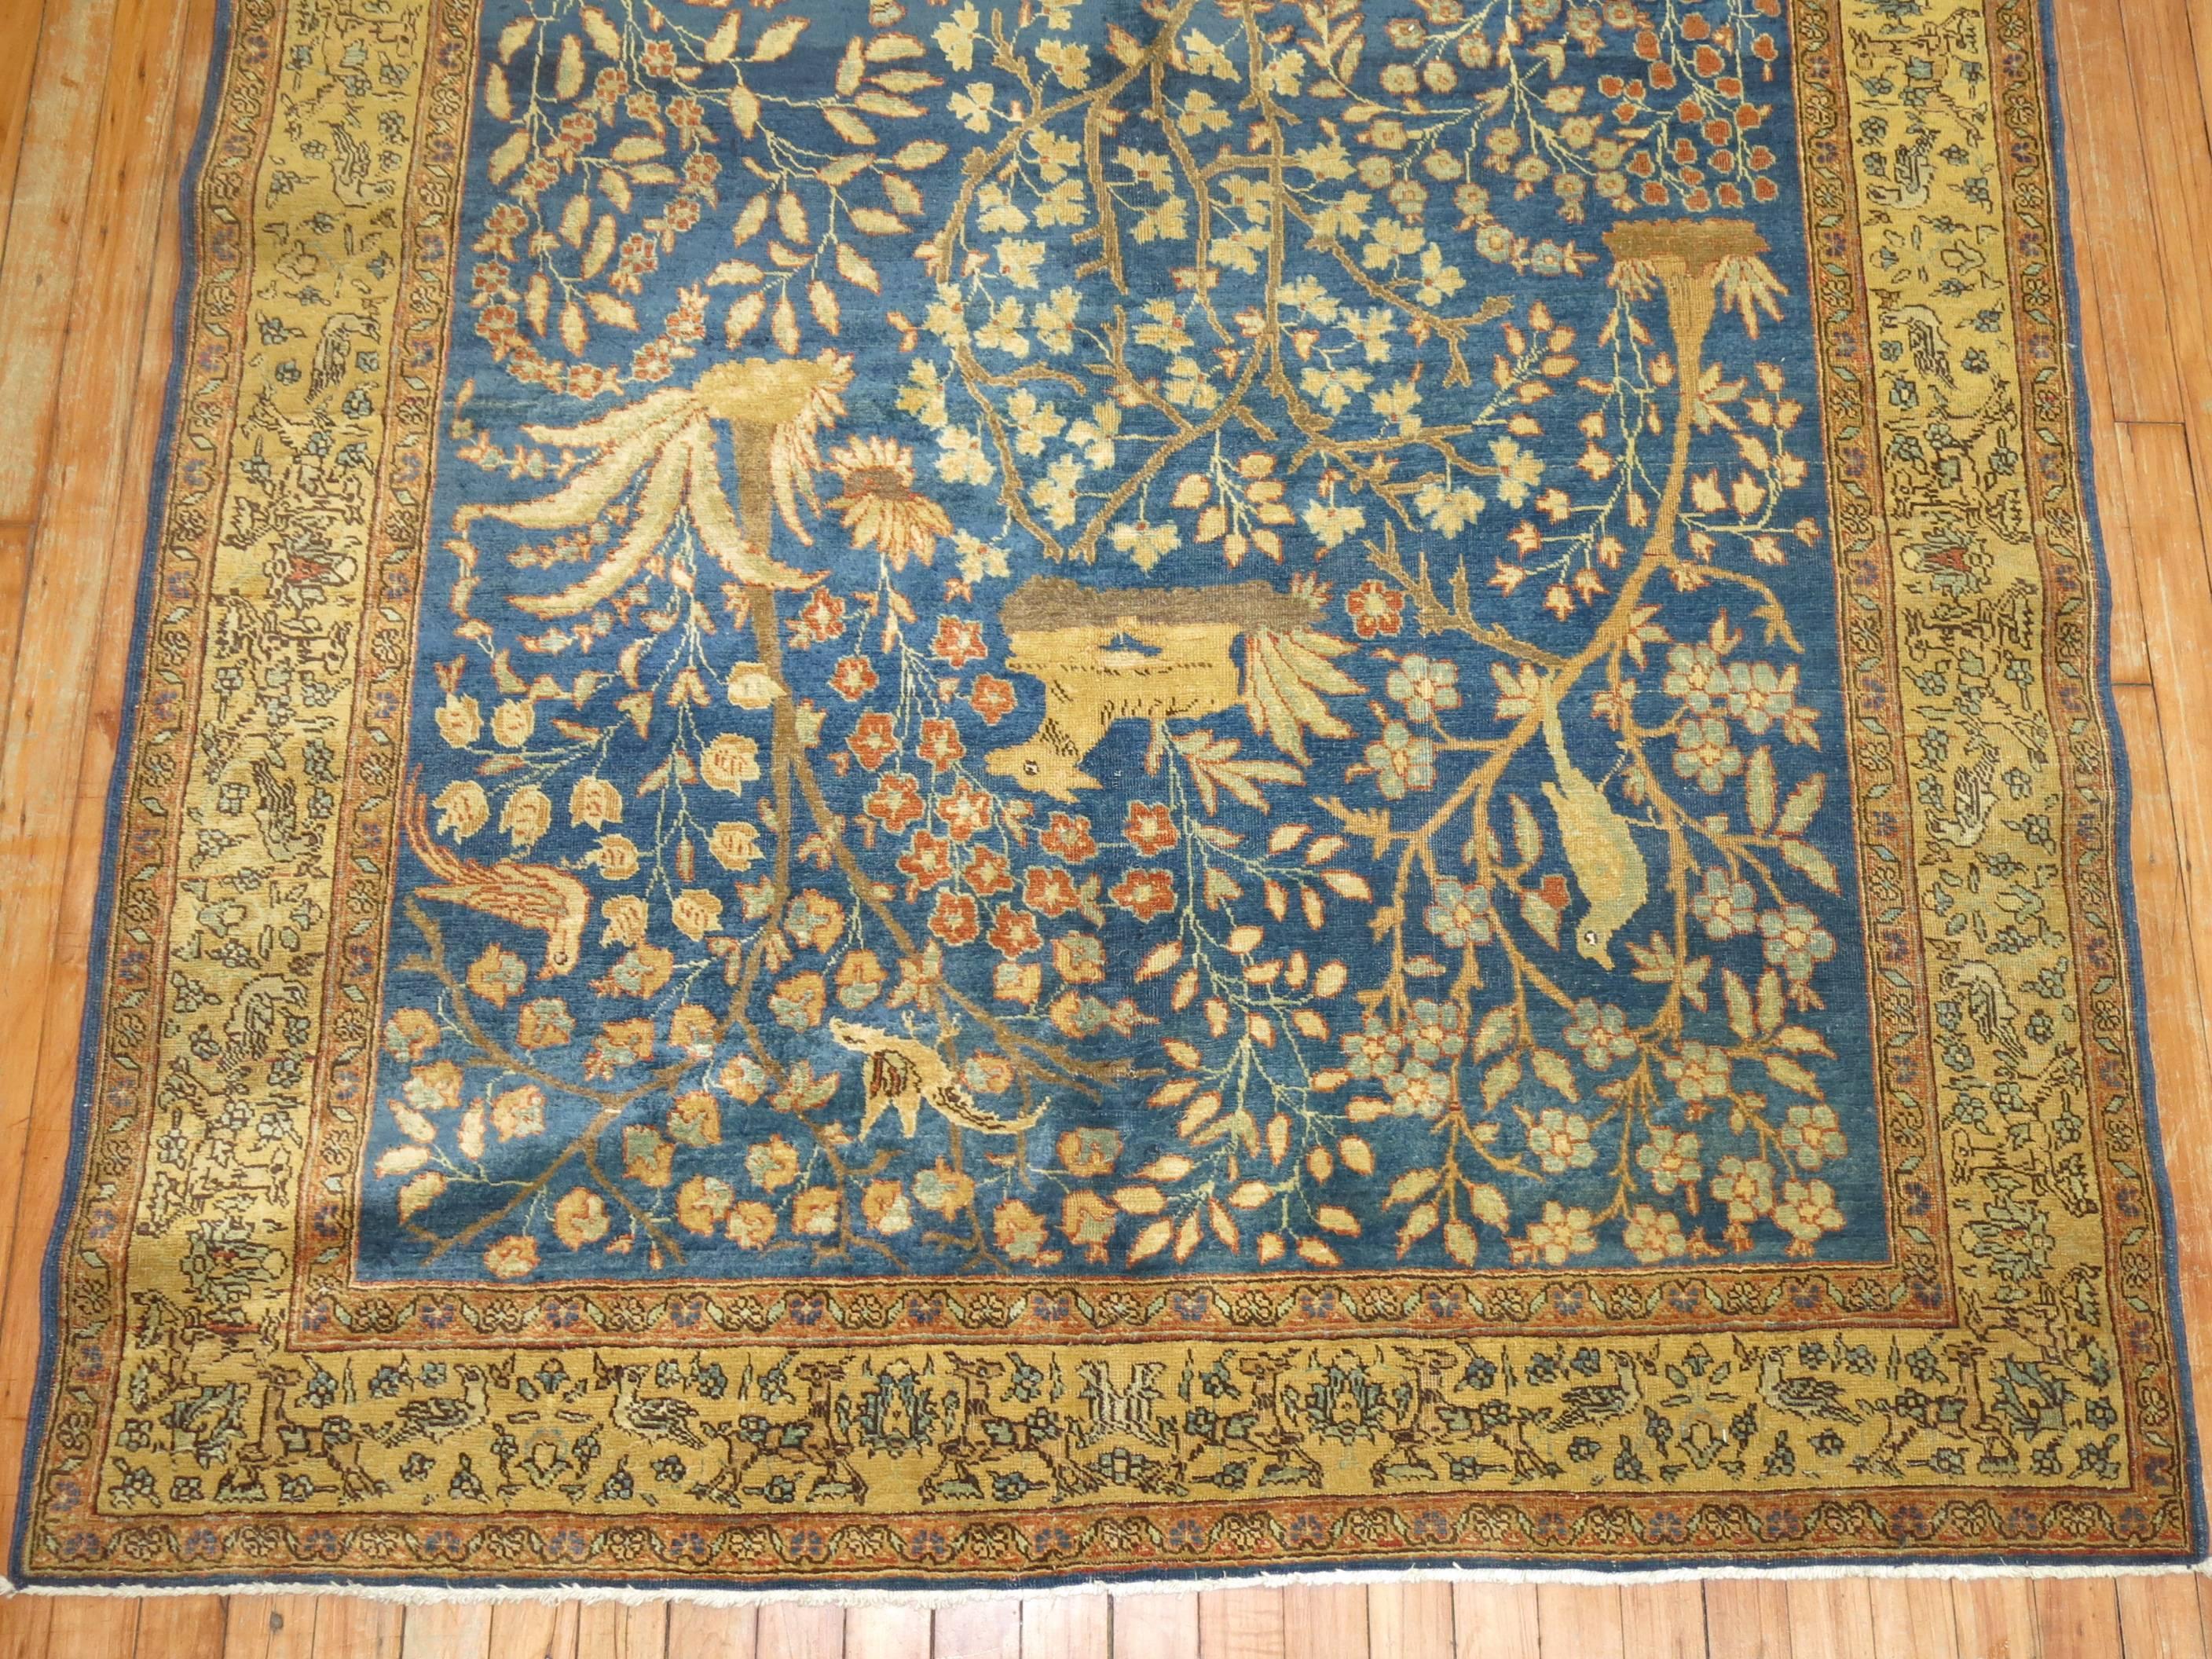 Hand-Woven Pictorial Antique Persian Tabriz Carpet in Blue